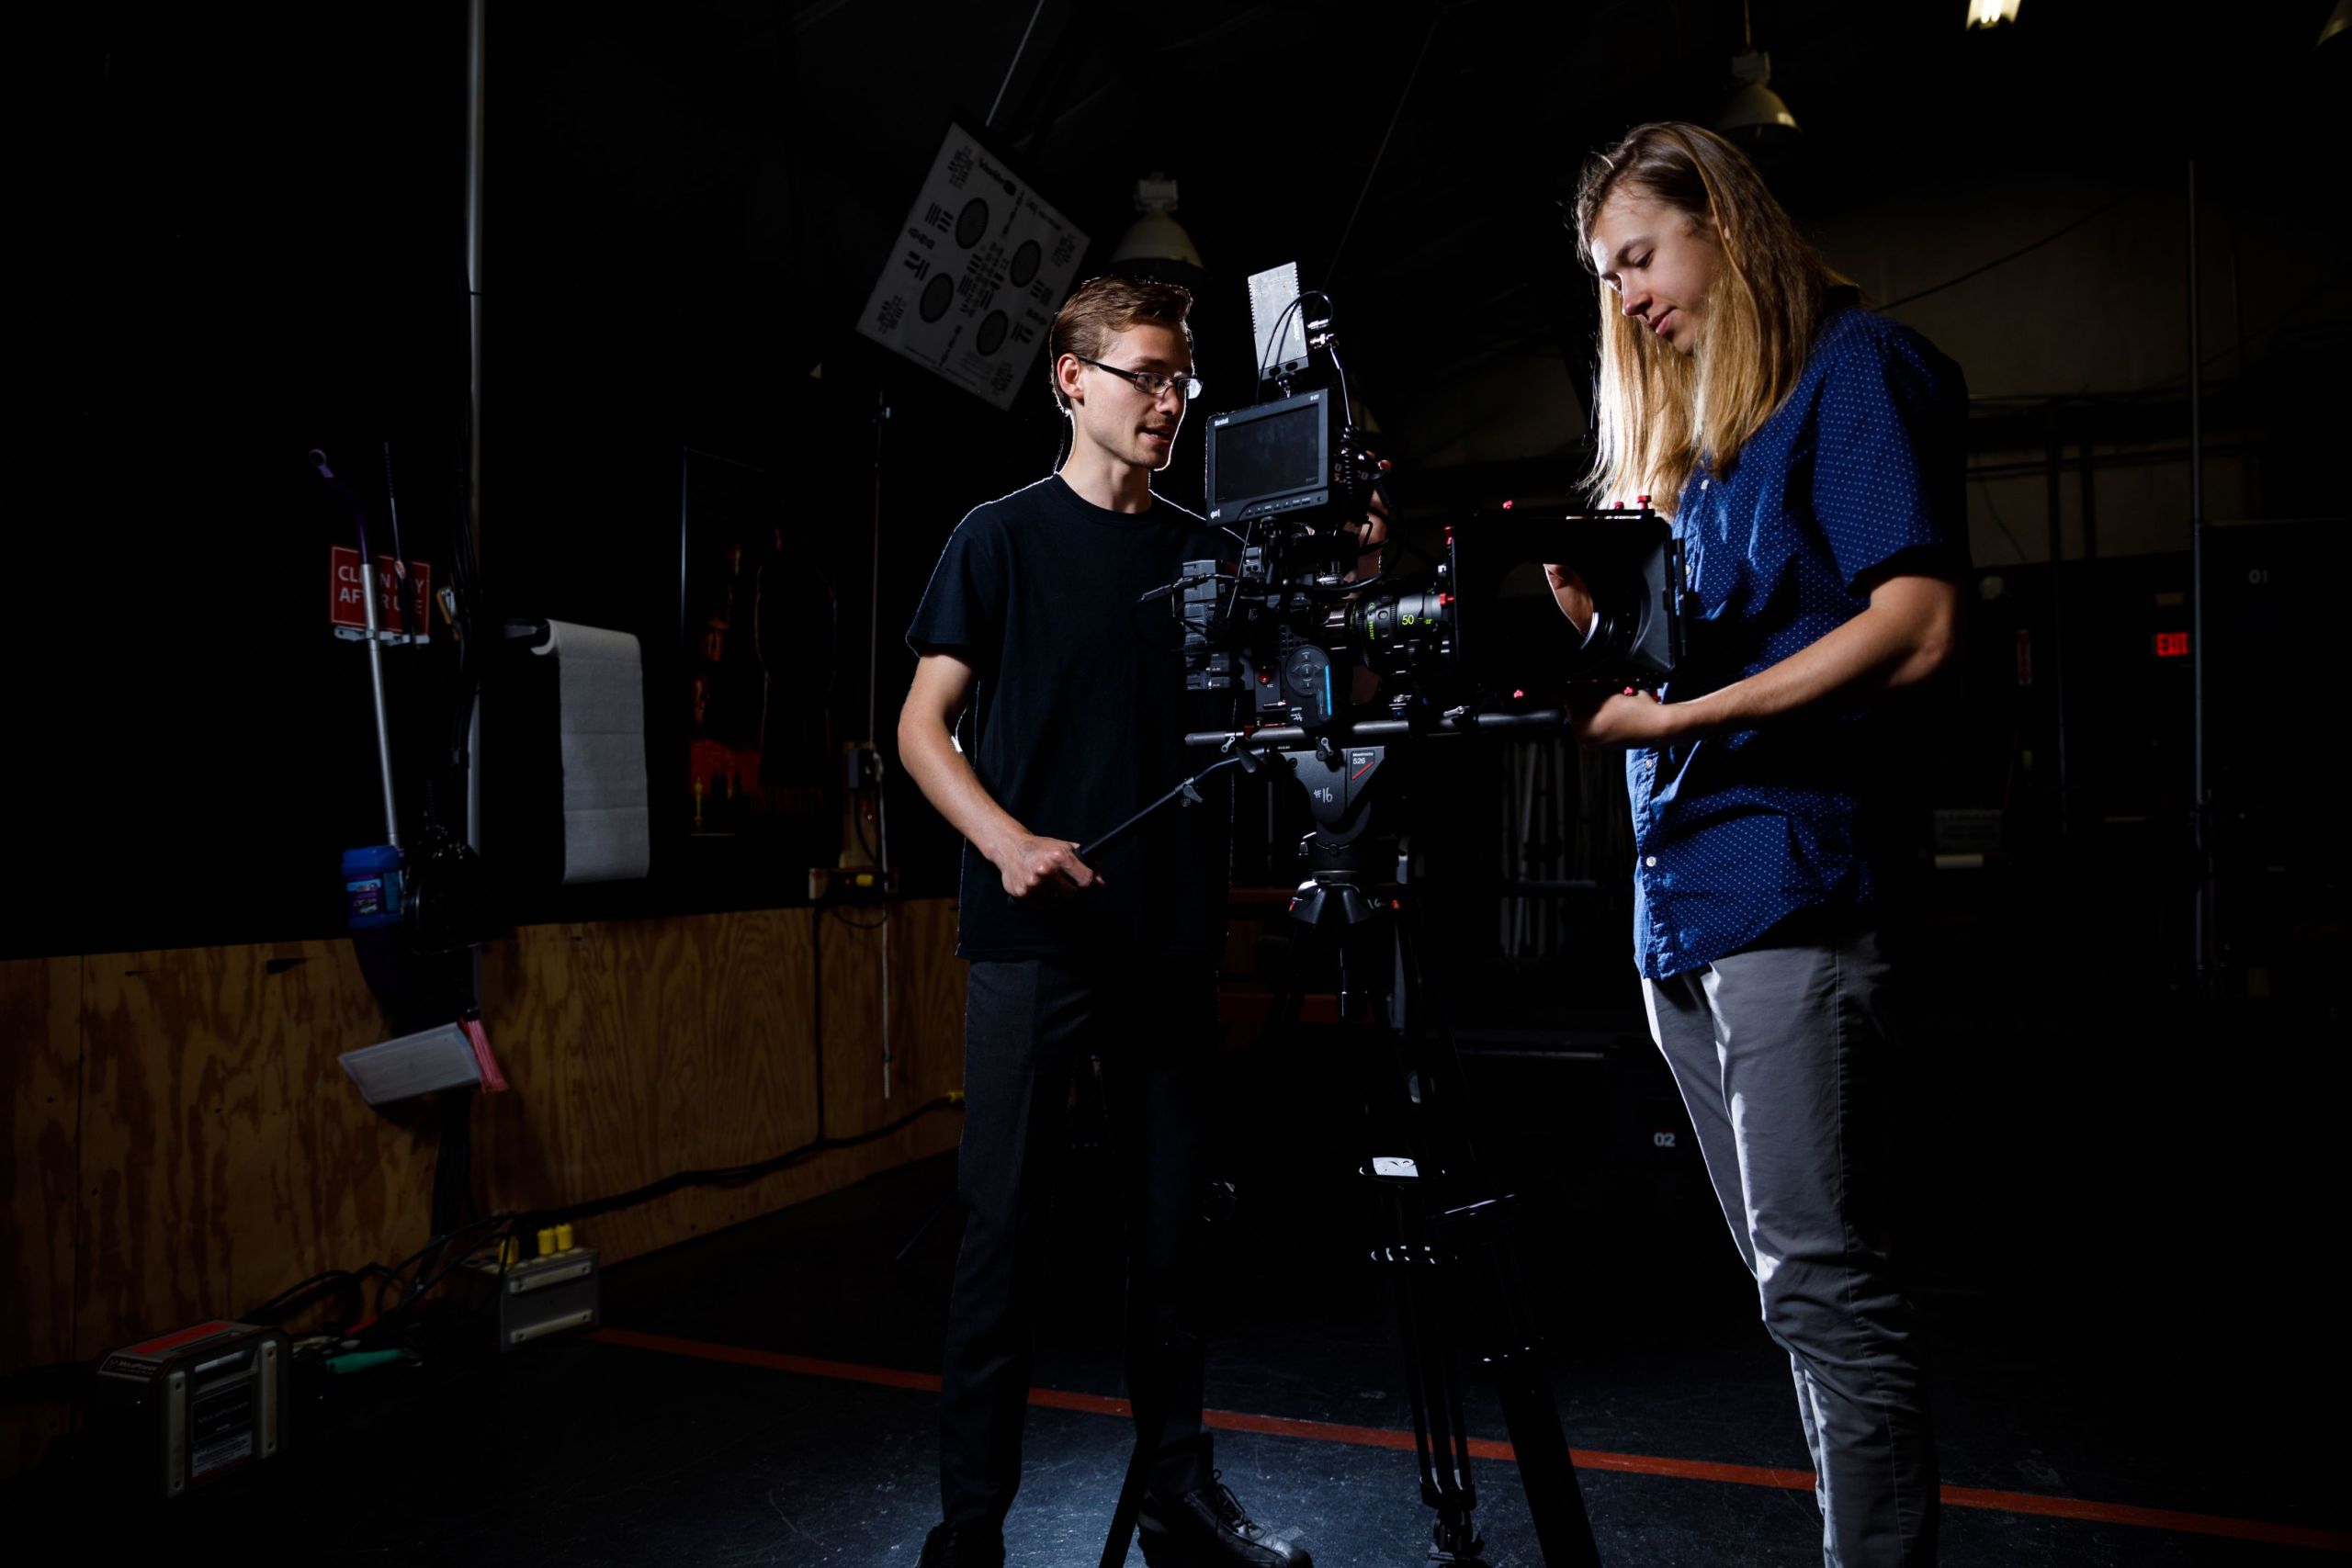 Bachelors In Video Production